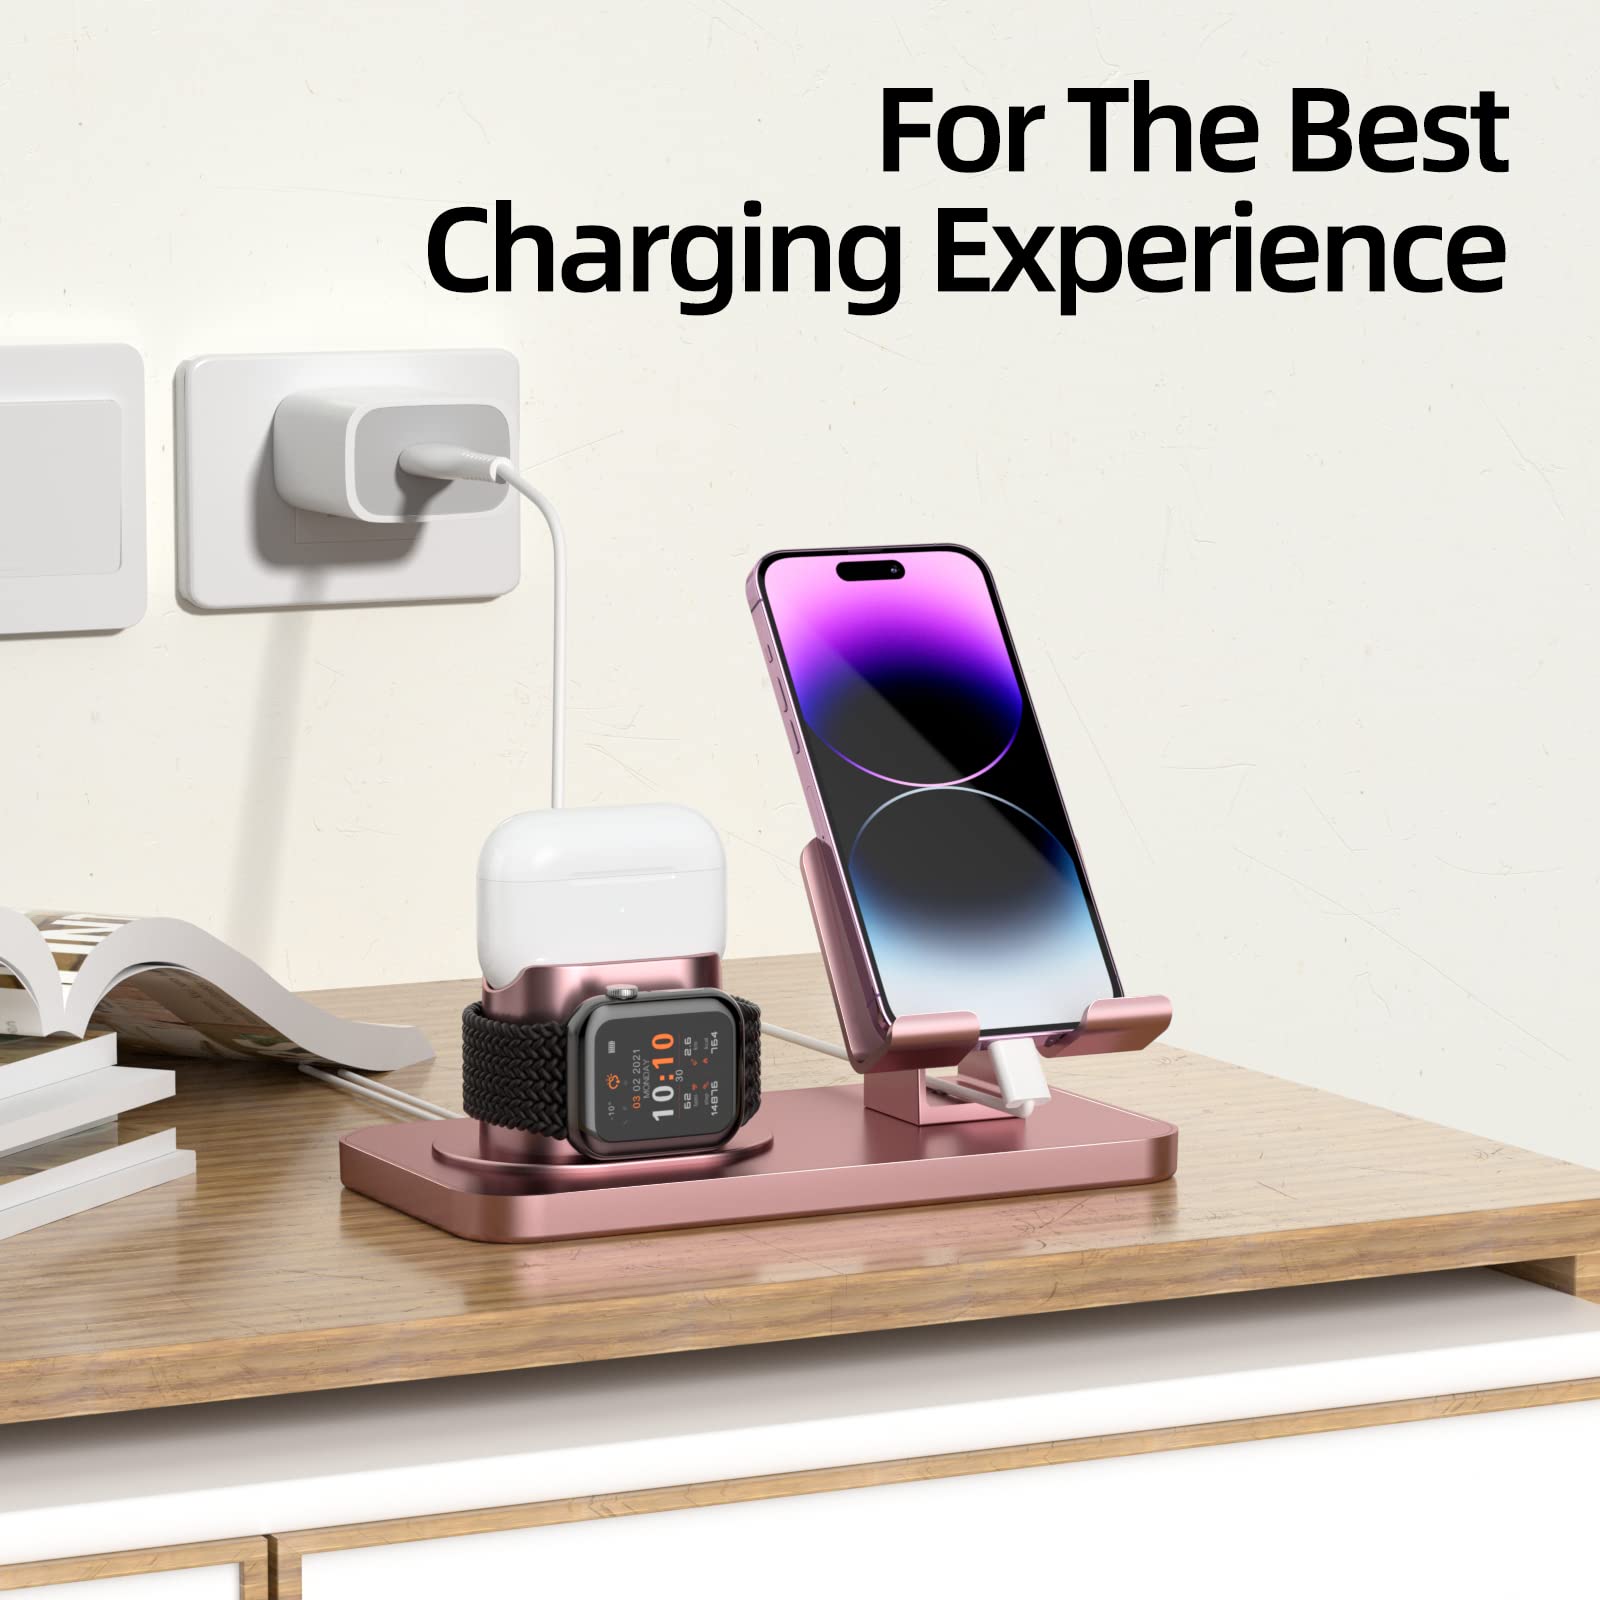 180°Rotation Phone Charger Stand Holder，3in1 Charger Dock, Charging Stand for iPhone/Apple Watch/Airpods/ipad and Most Smartphones (Rose Gold)